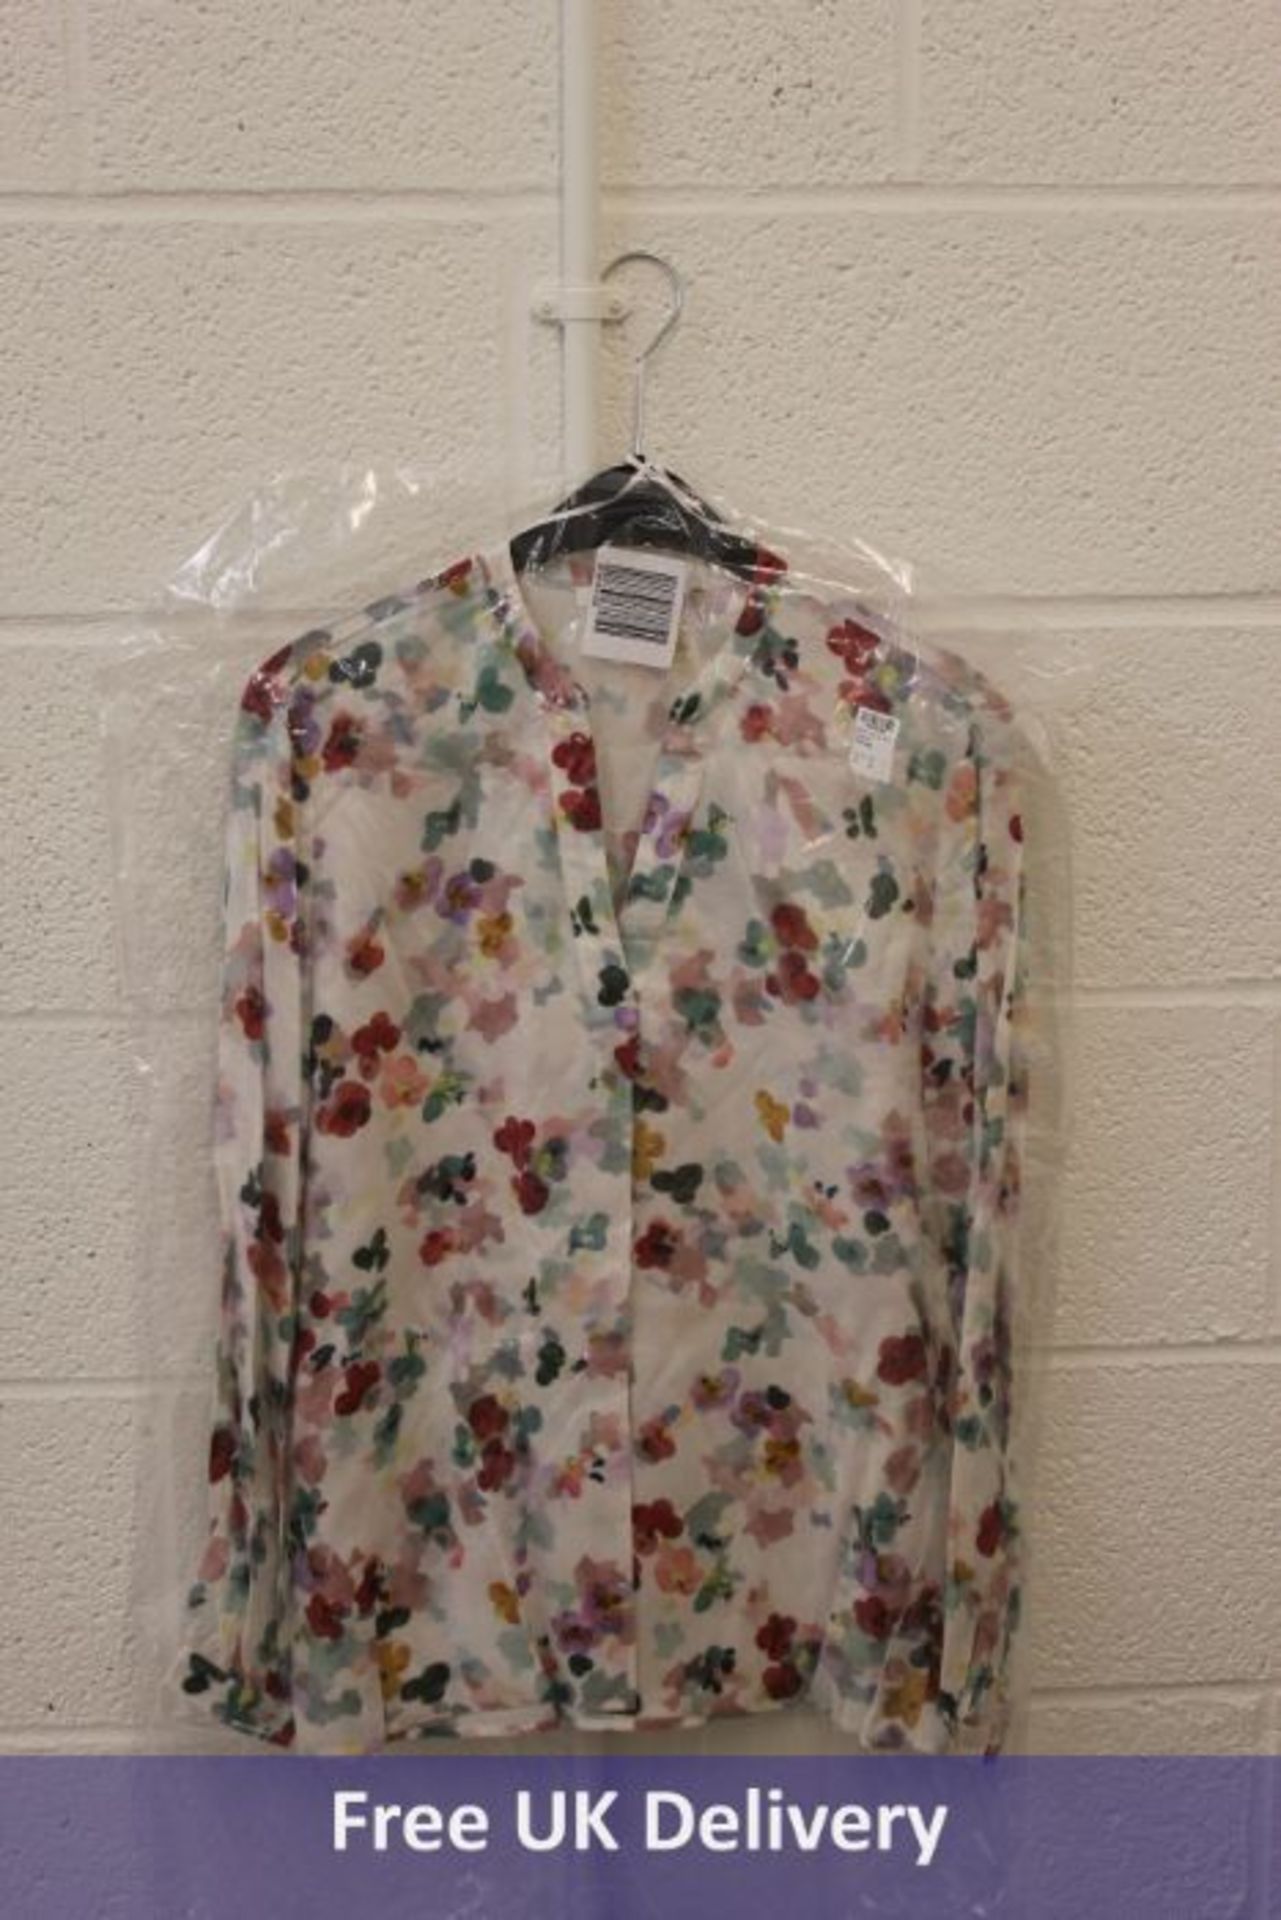 Six Brax Vian Floral Geo Print Tops, White/Multi to include 1x 10, 2x 12, 1x 14, 1x 16 and 1 x 18